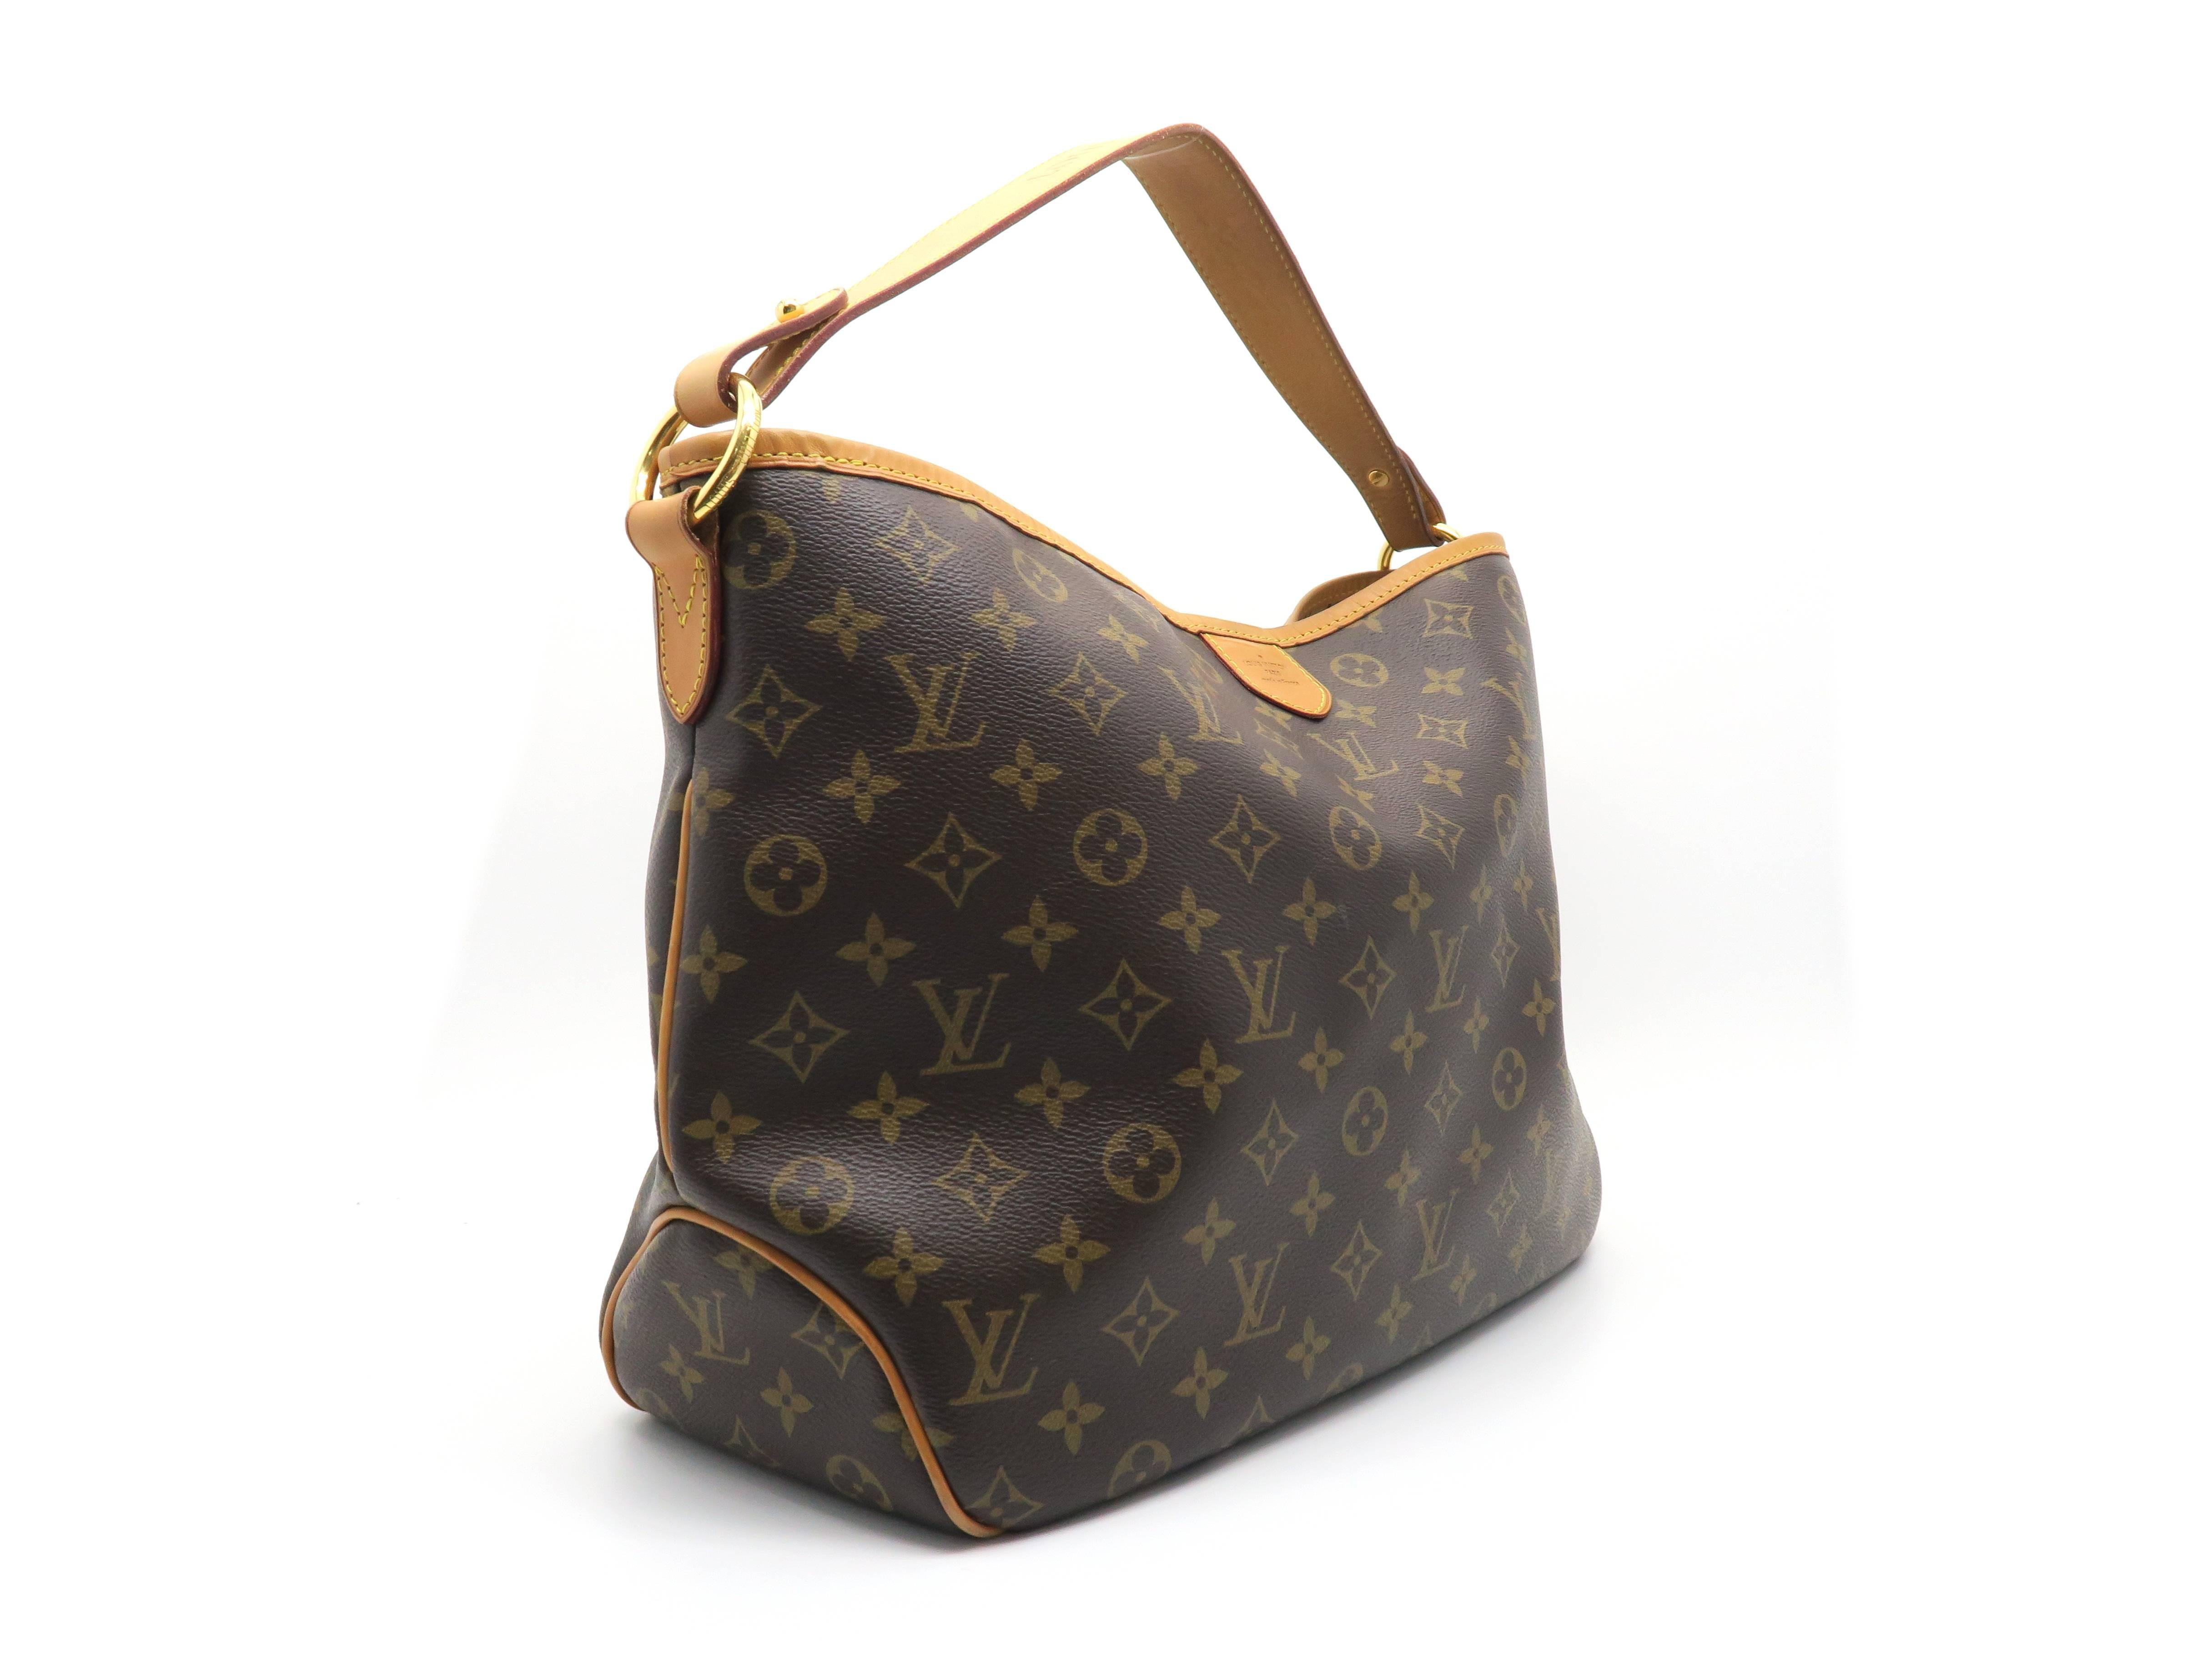 Color: Brown
Material: Monogram Canvas

Condition: Rank A
Overall: Good, few minor defects
Surface: Minor Scratches
Corners : Minor Scratches 
Edges: Minor Scratches 
Handles/Straps: Minor Scratches 
Hardware: Minor Scratches 
 

Dimension: W36 ×